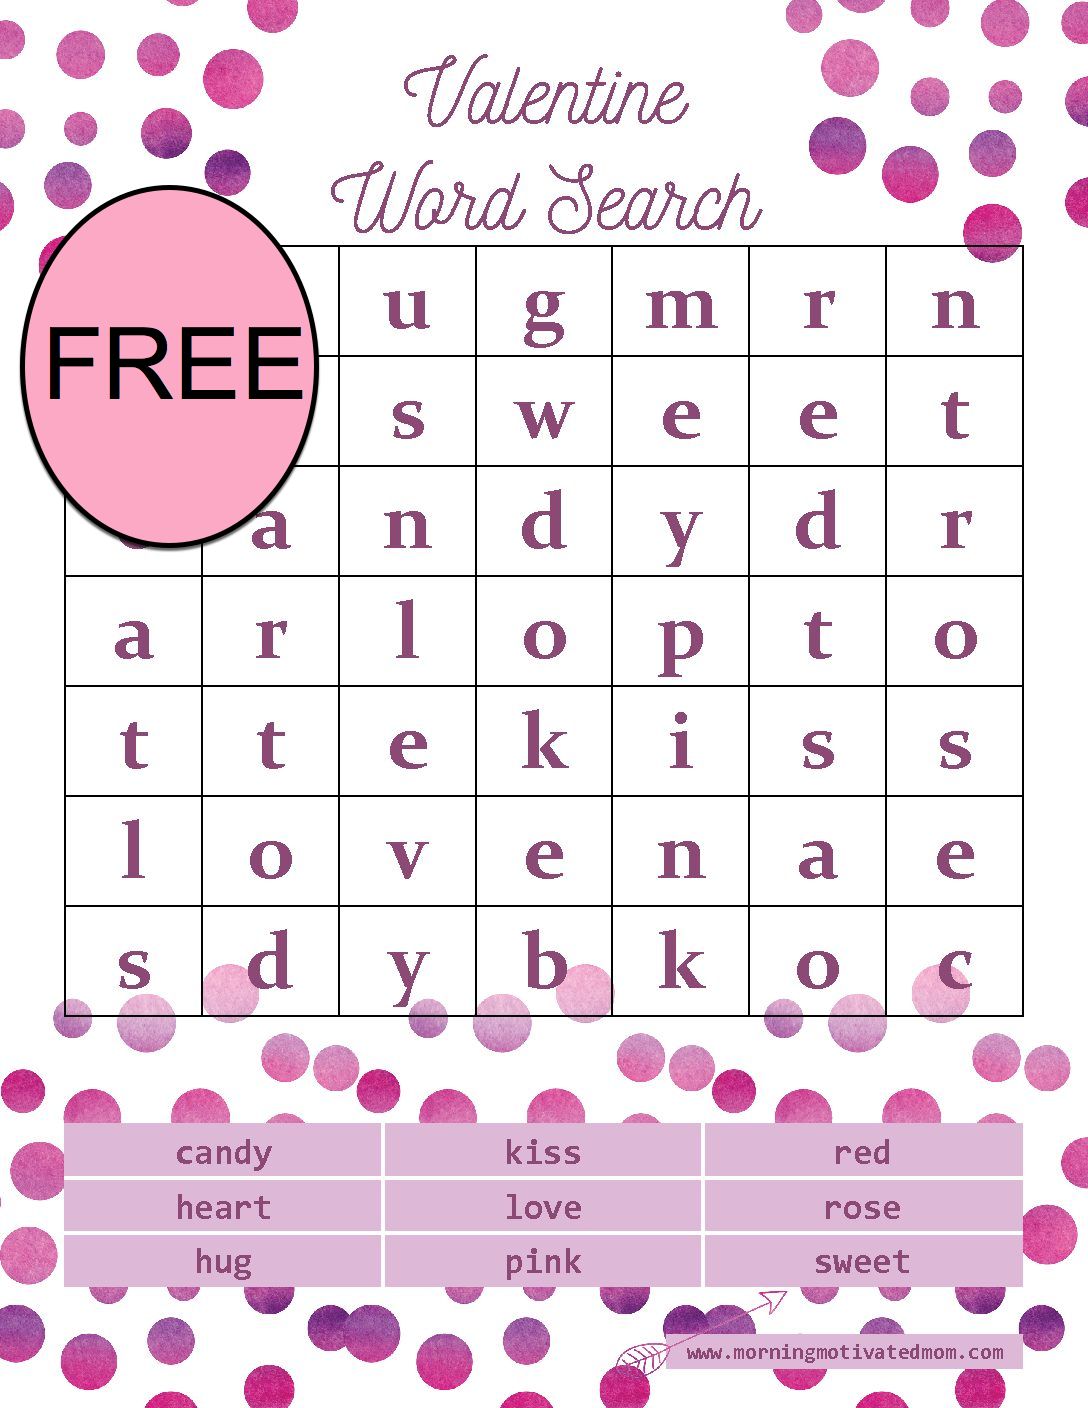 FREE Valentine's Day Word Search Printable 2-1